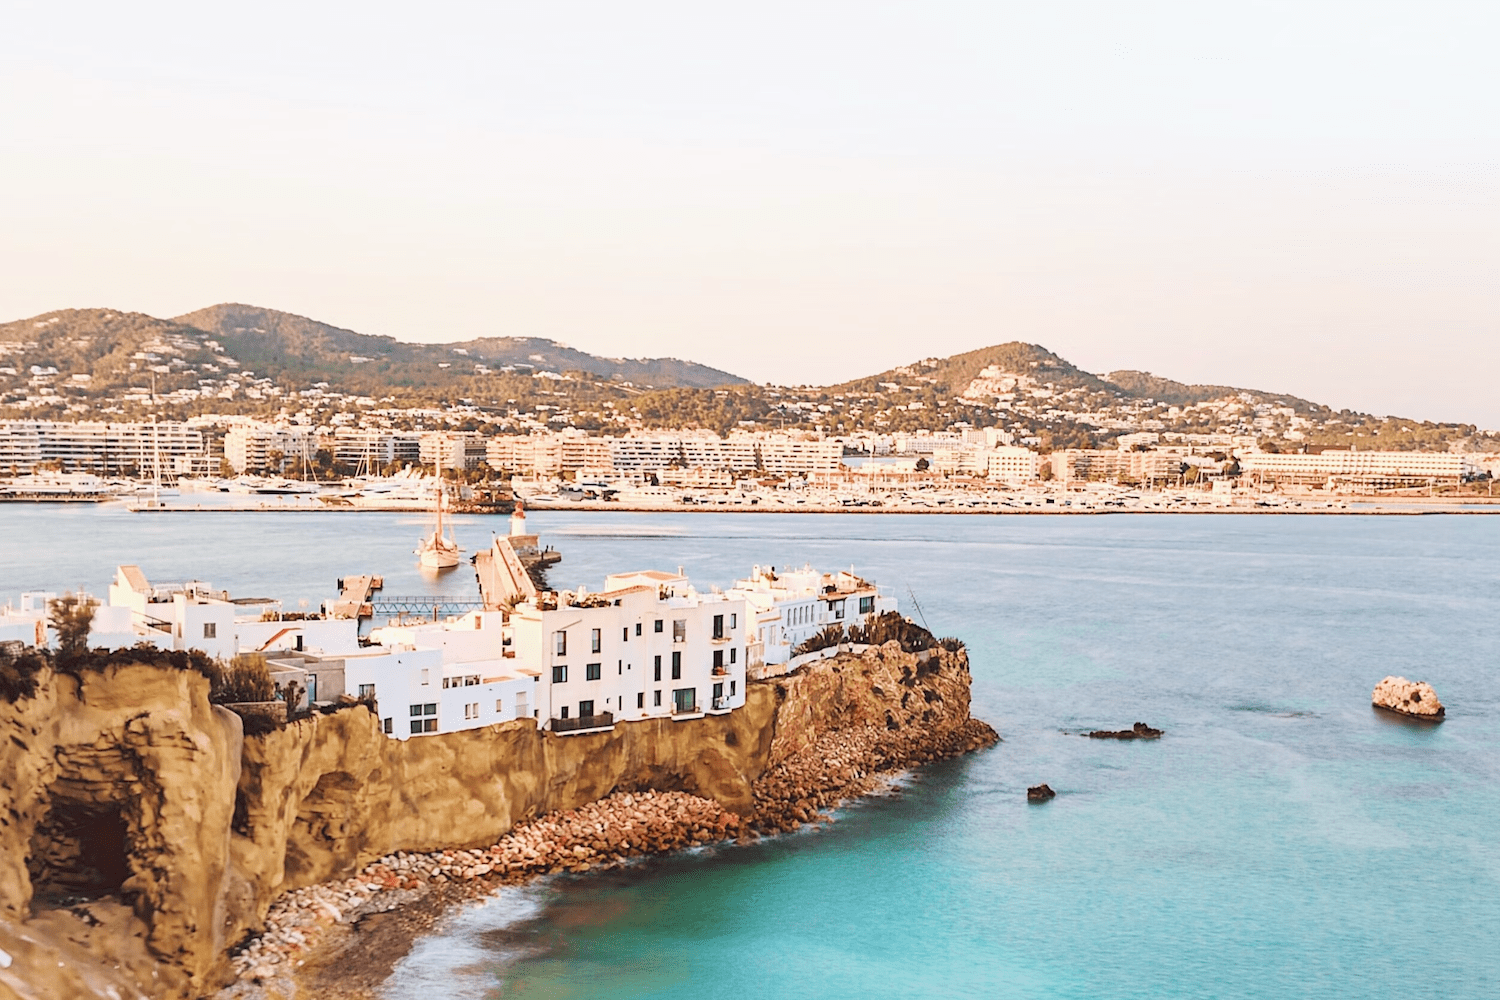 Your online map of Ibiza: All the places you should visit